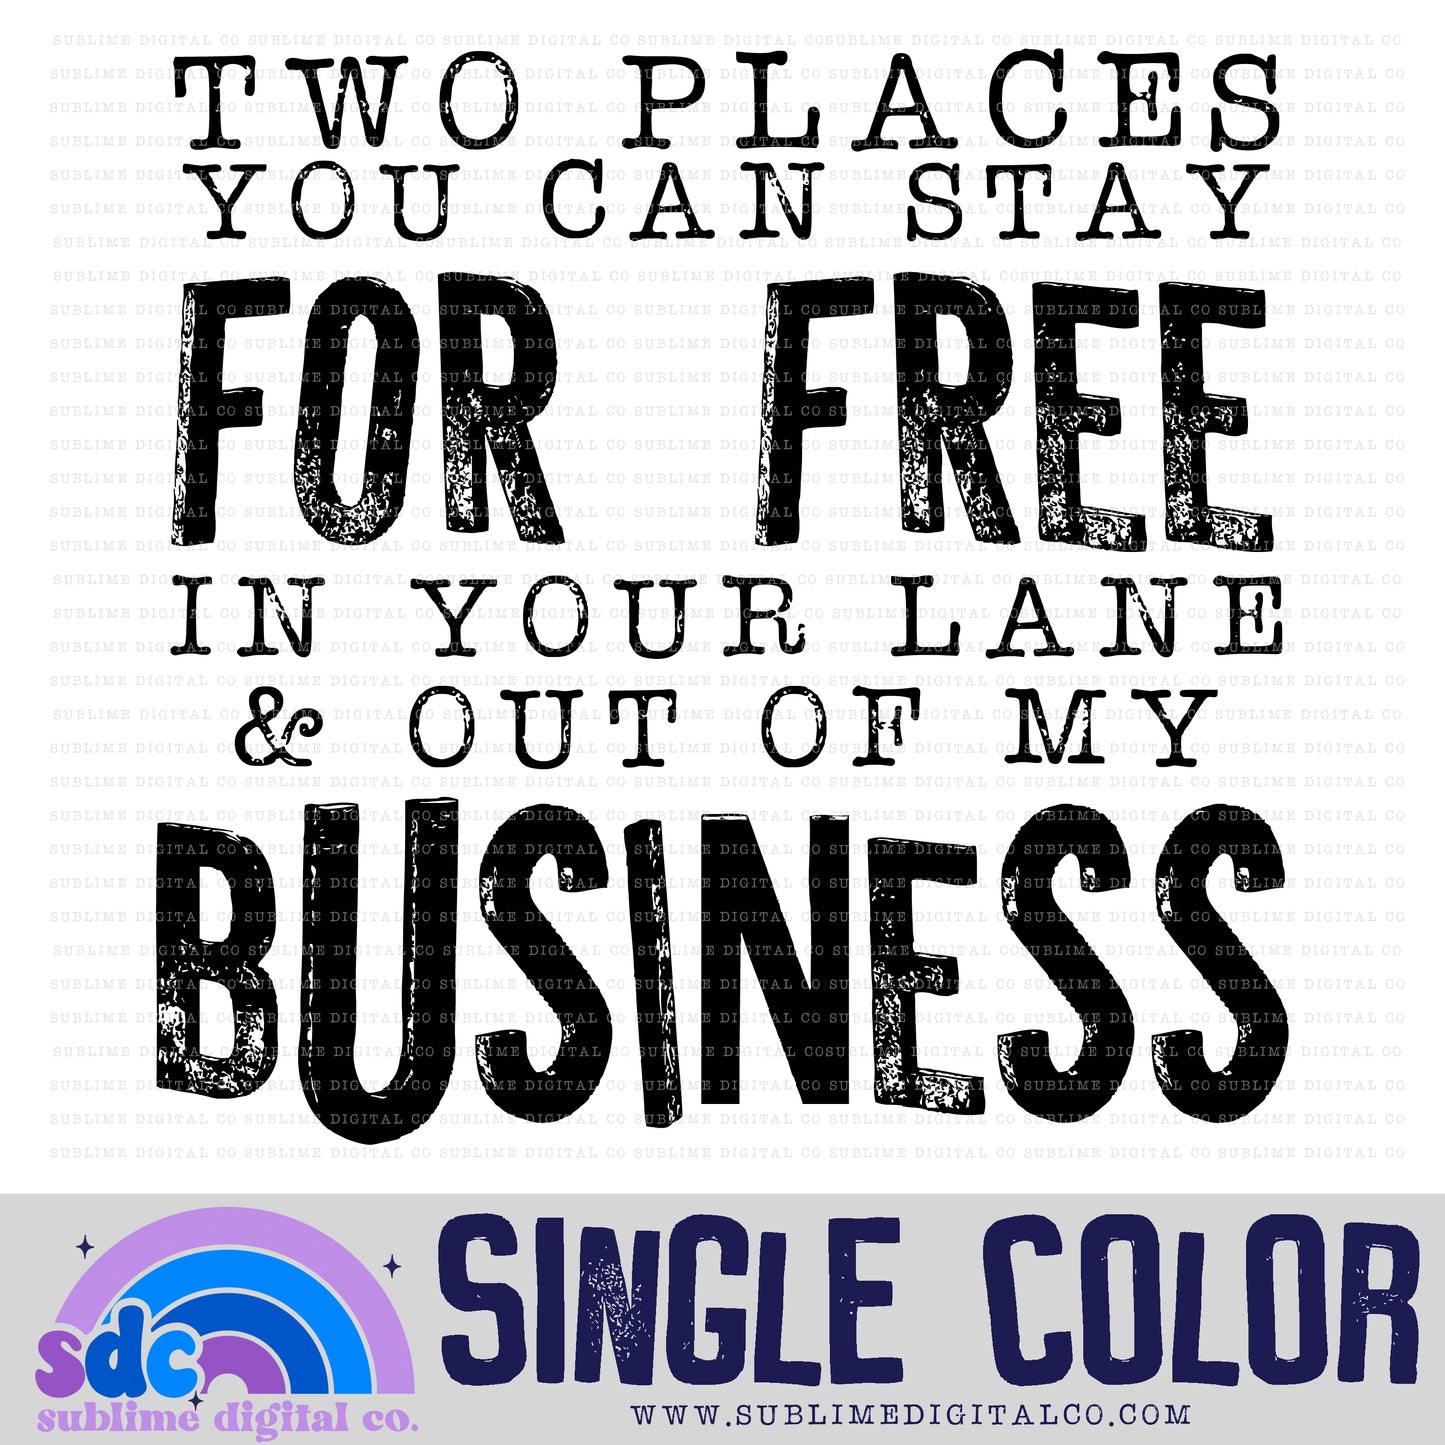 Two Places You Can Stay • Single Color • Snarky • Instant Download • Sublimation Design